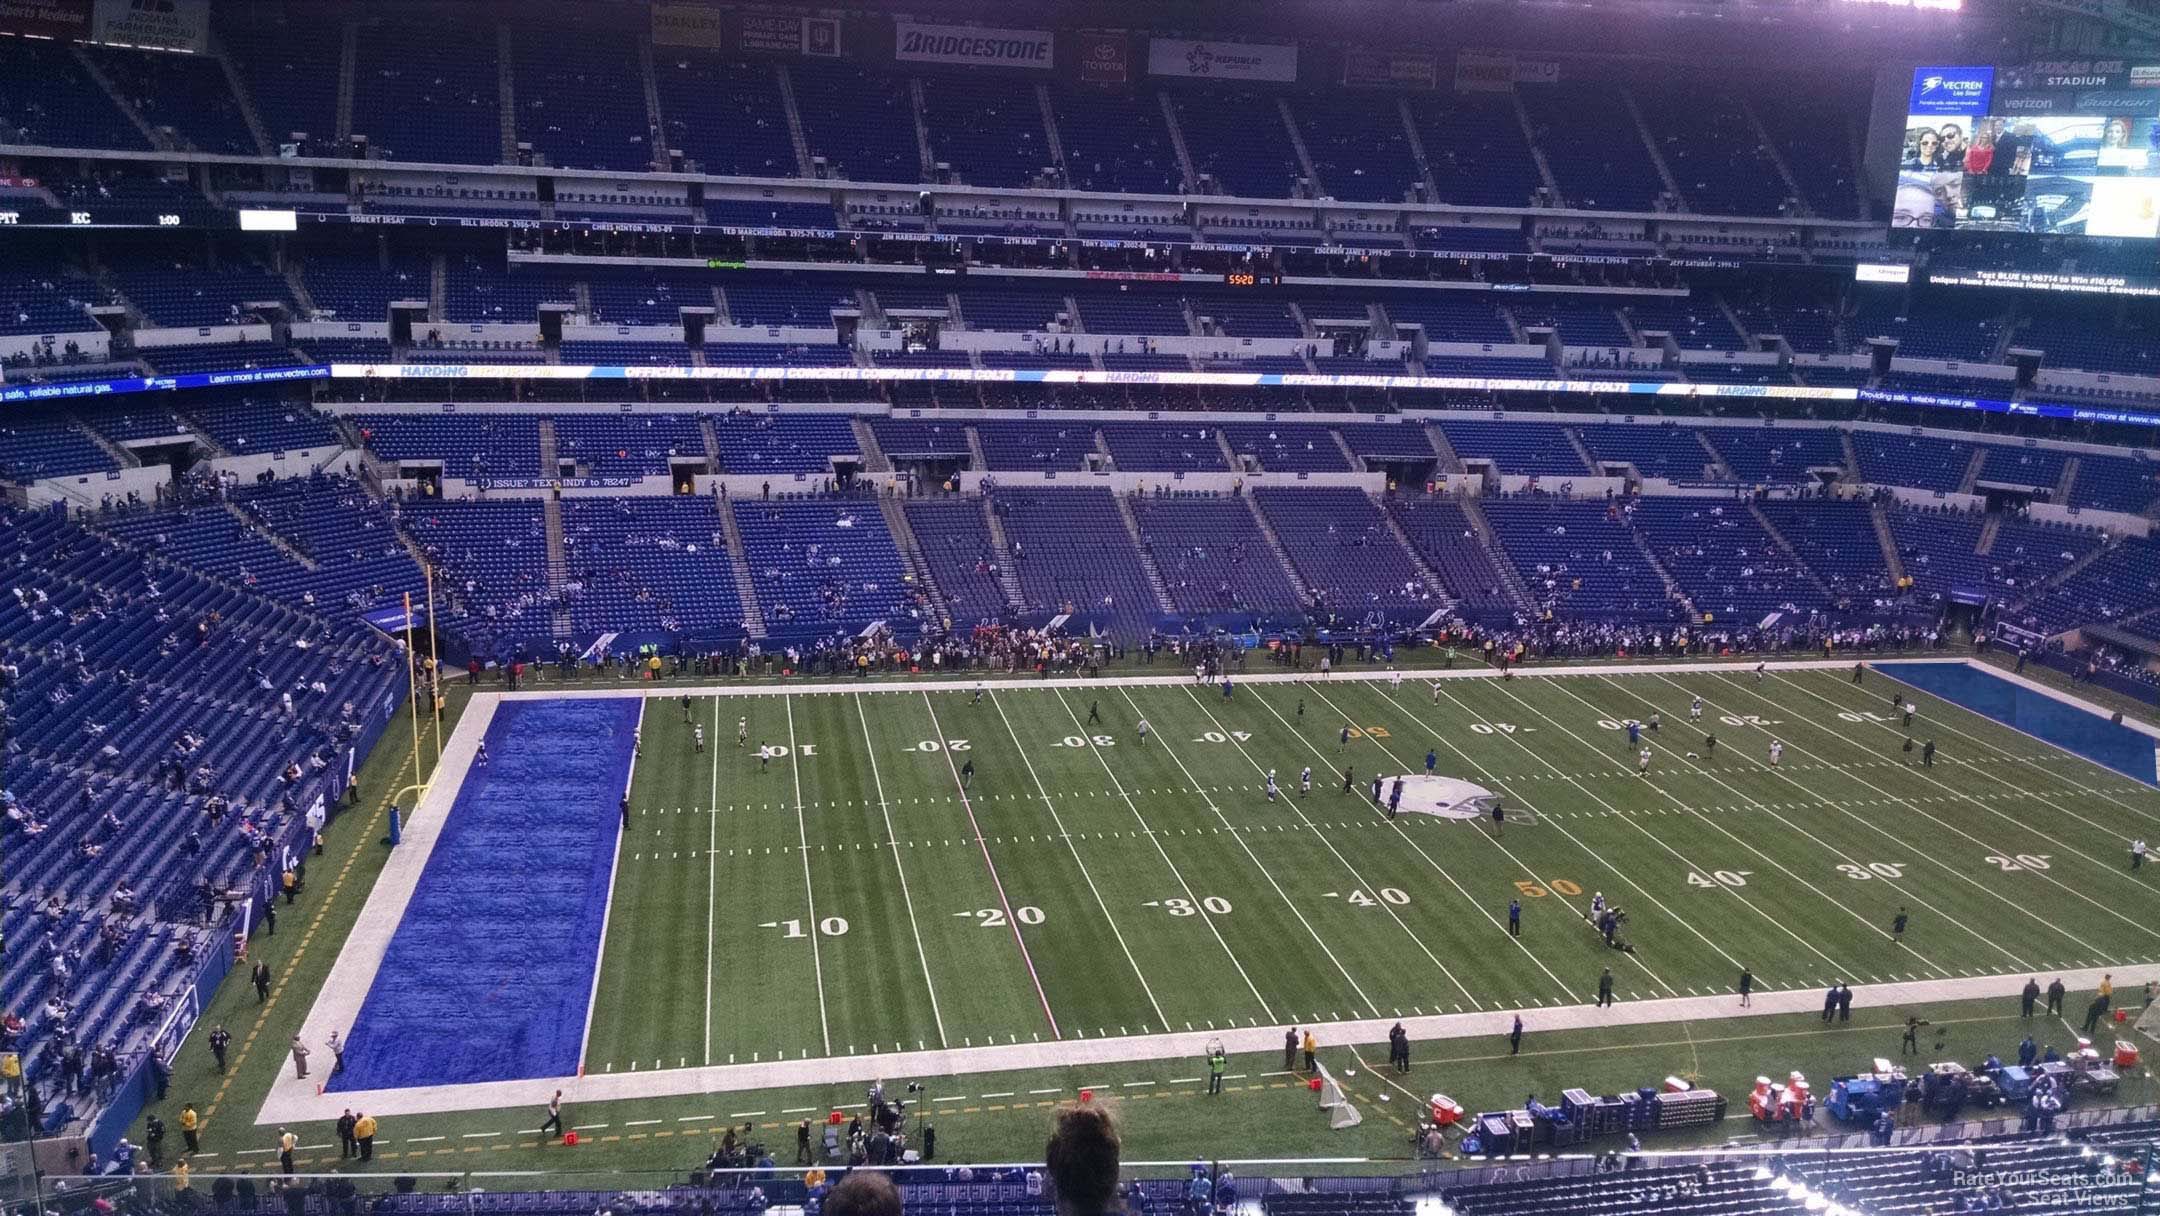 Indianapolis Colts Seating Chart View